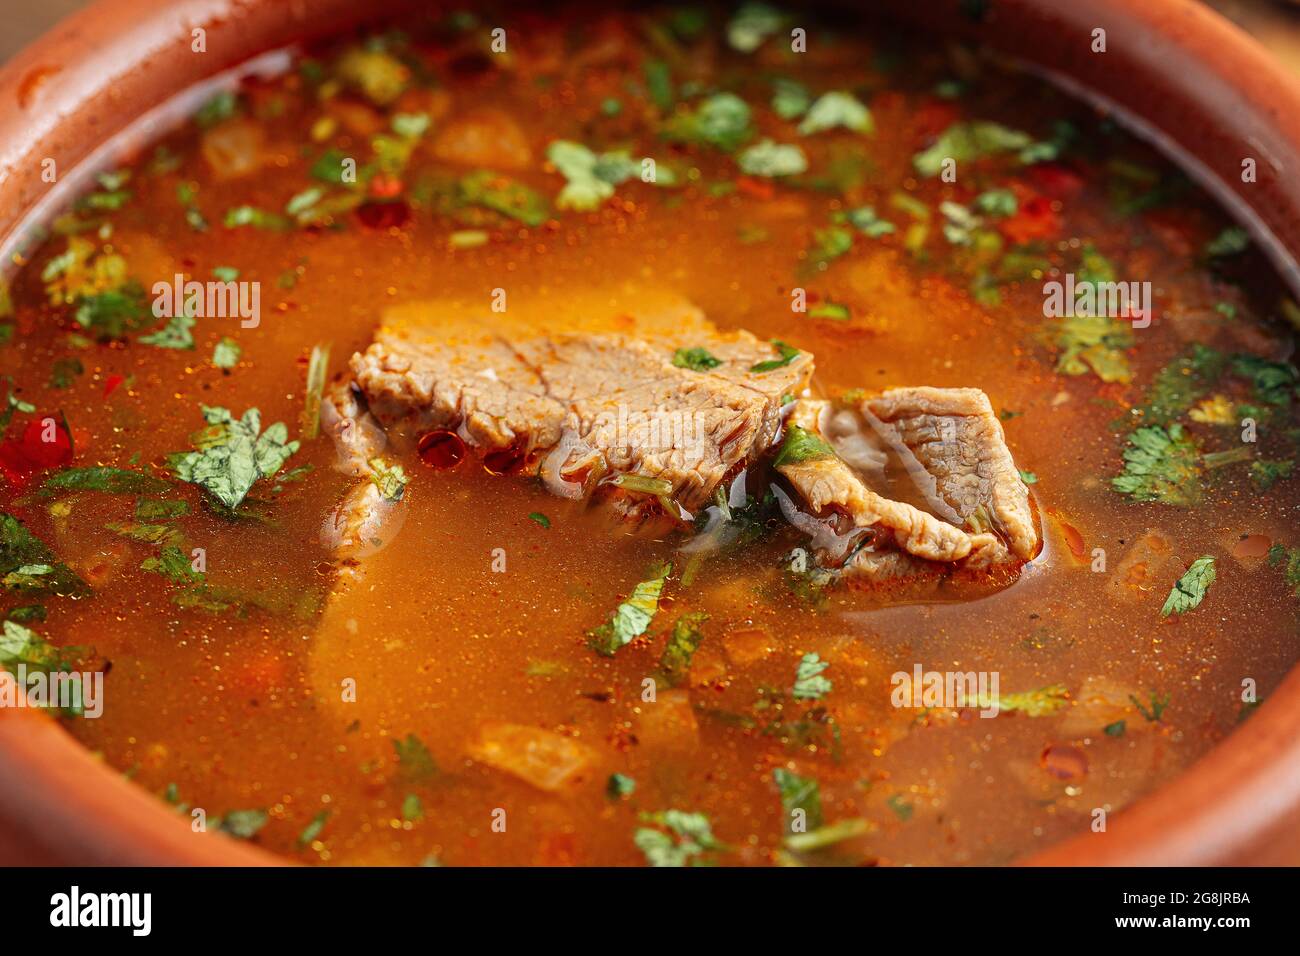 Closeup on georgian national kharcho soup with beef and rice Stock Photo